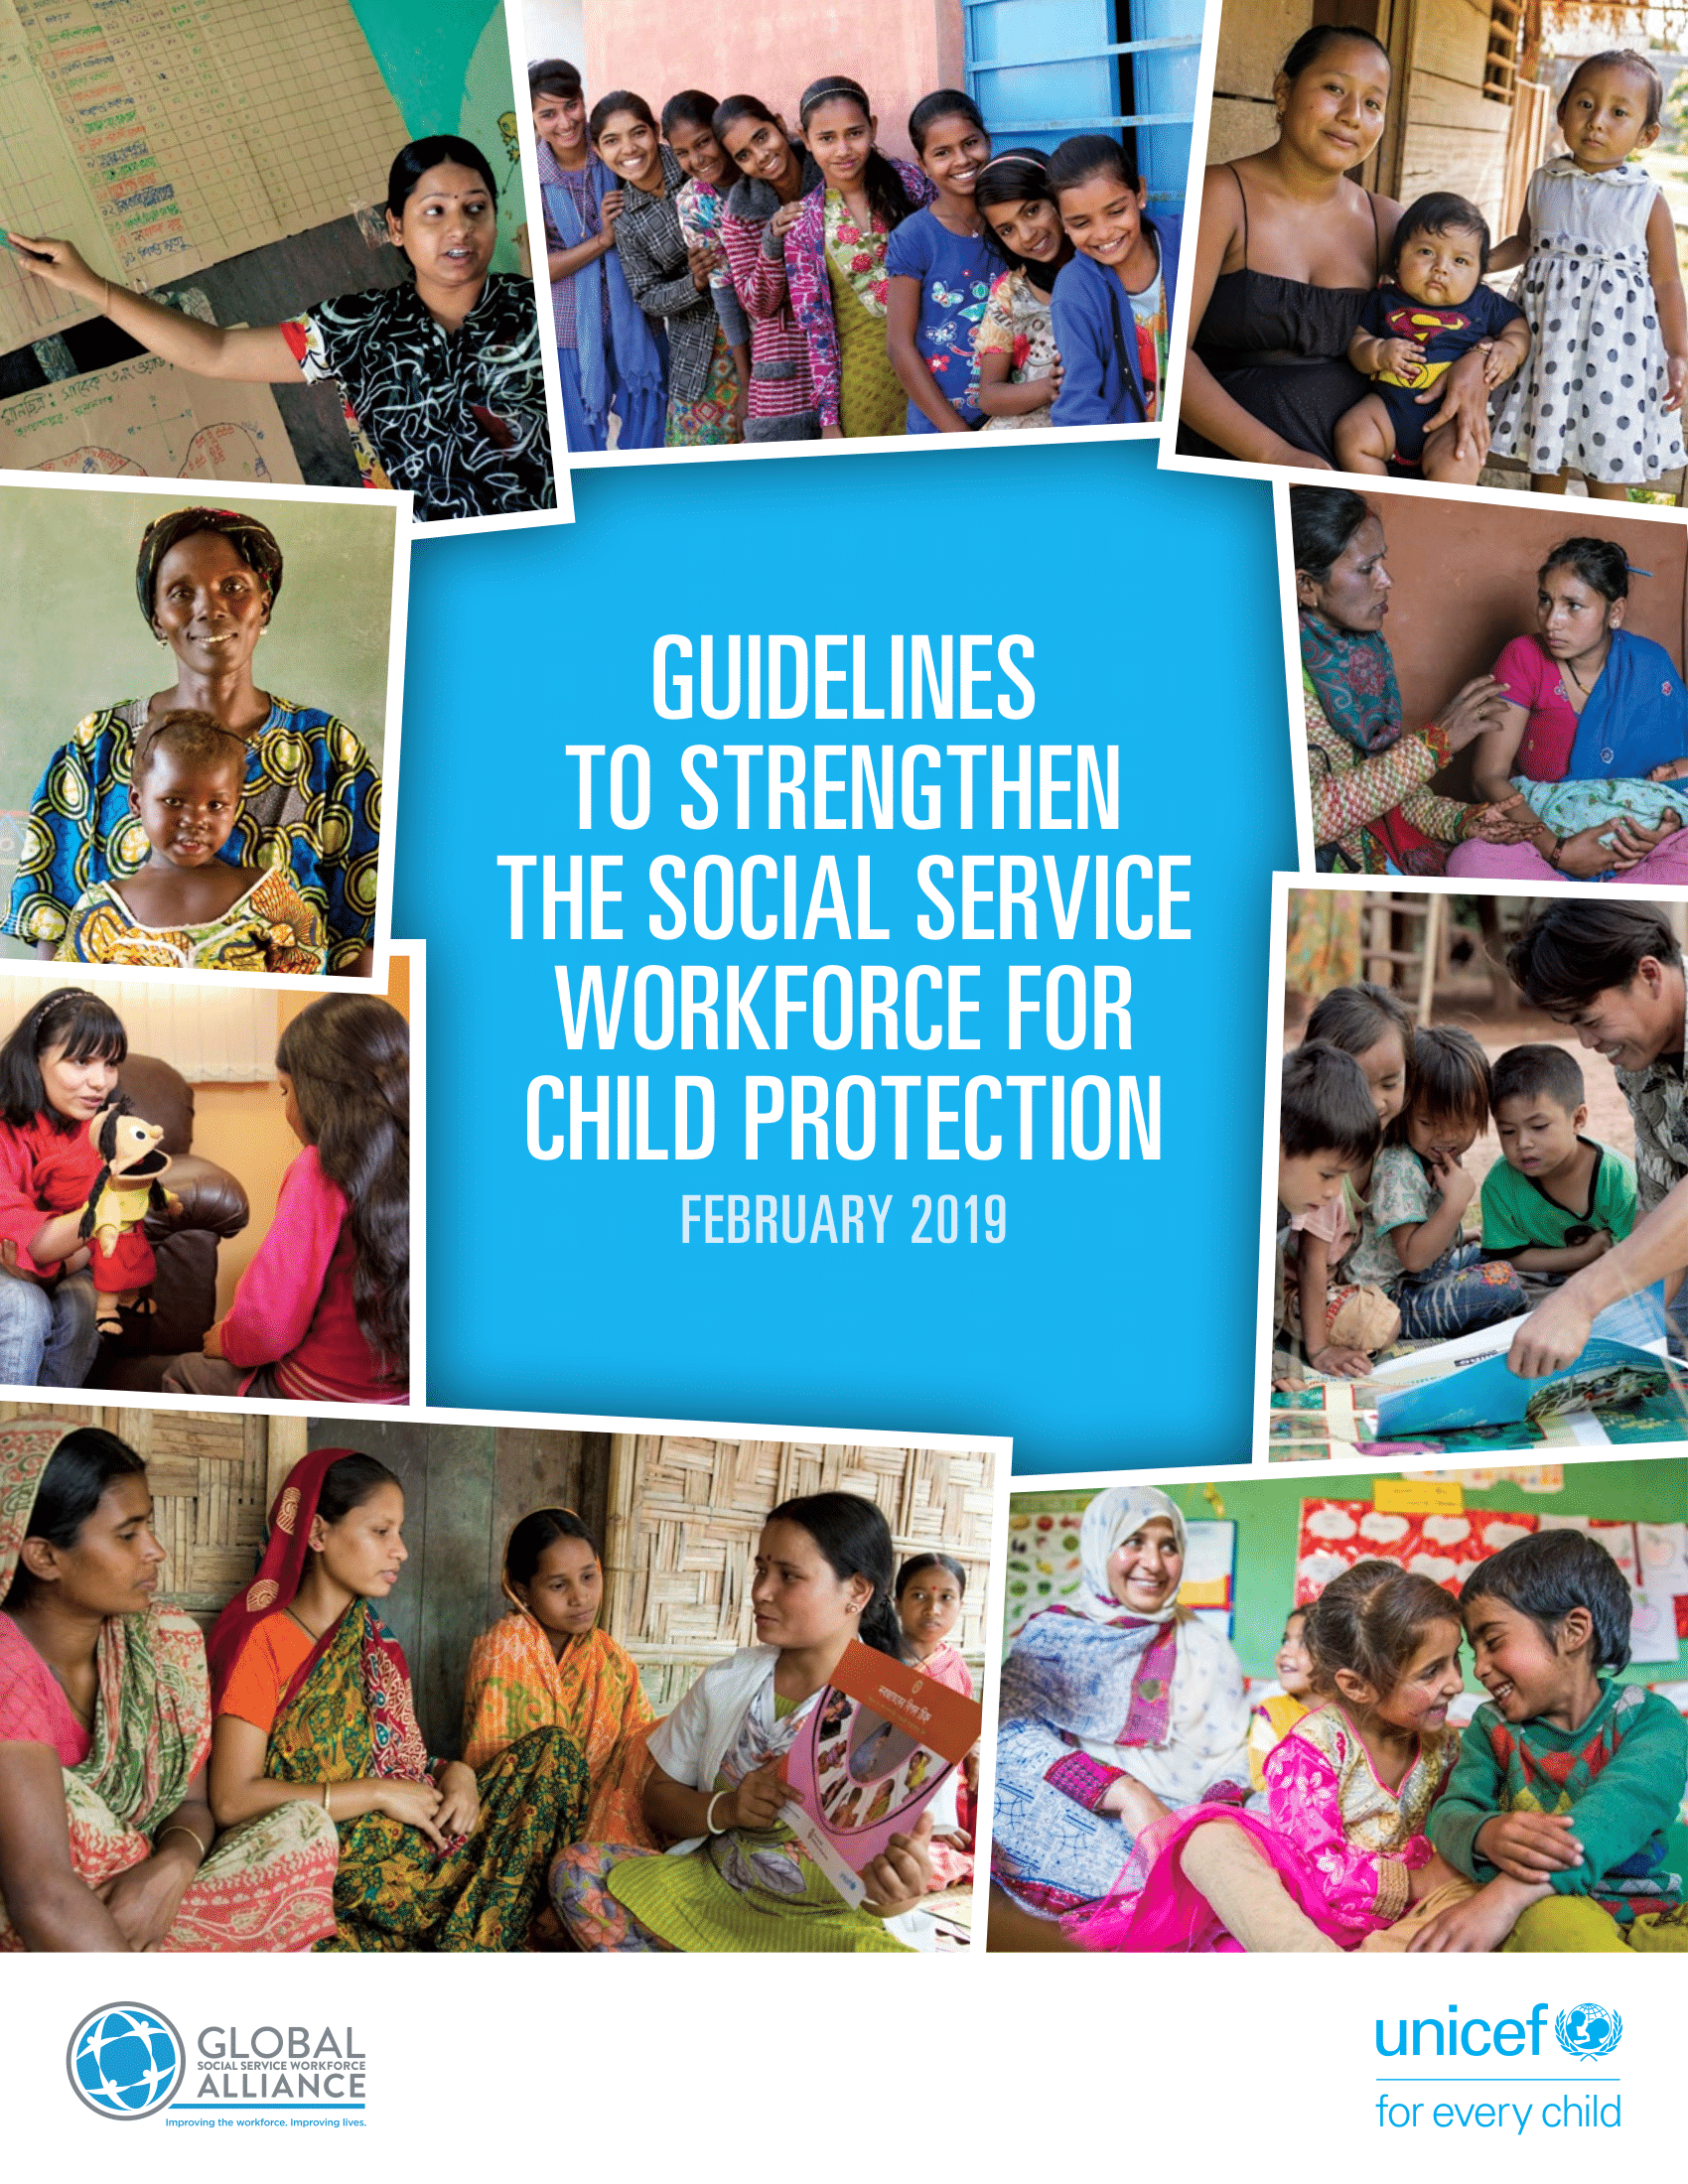 The Guidelines to Strengthen the Social Service Workforce for Child Protection